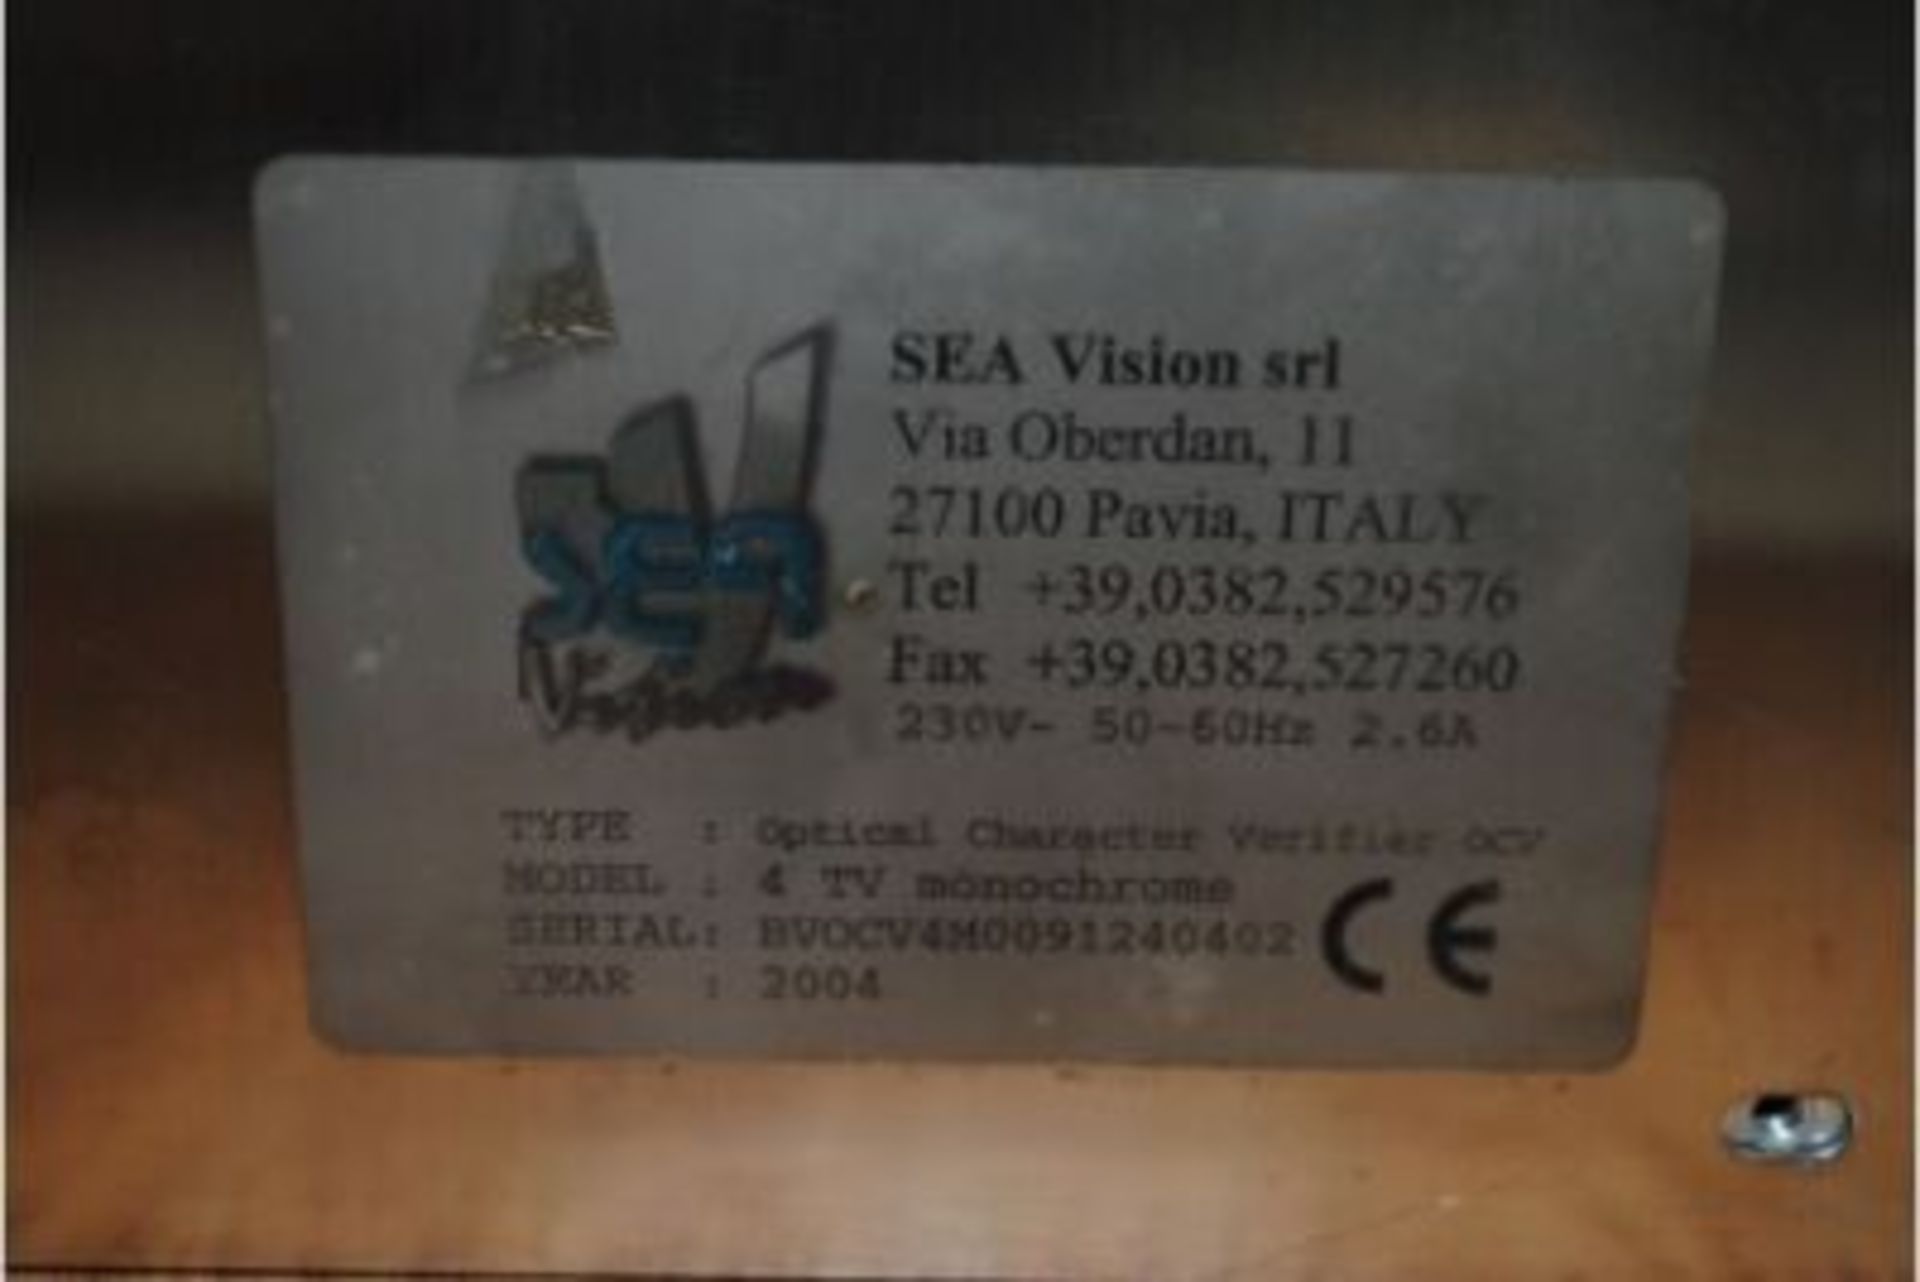 Sea Vision Model: 4 TV Monochrome Optical character Verifier Year 2004 S/N: BVOCVVM0091240402 - Image 4 of 4